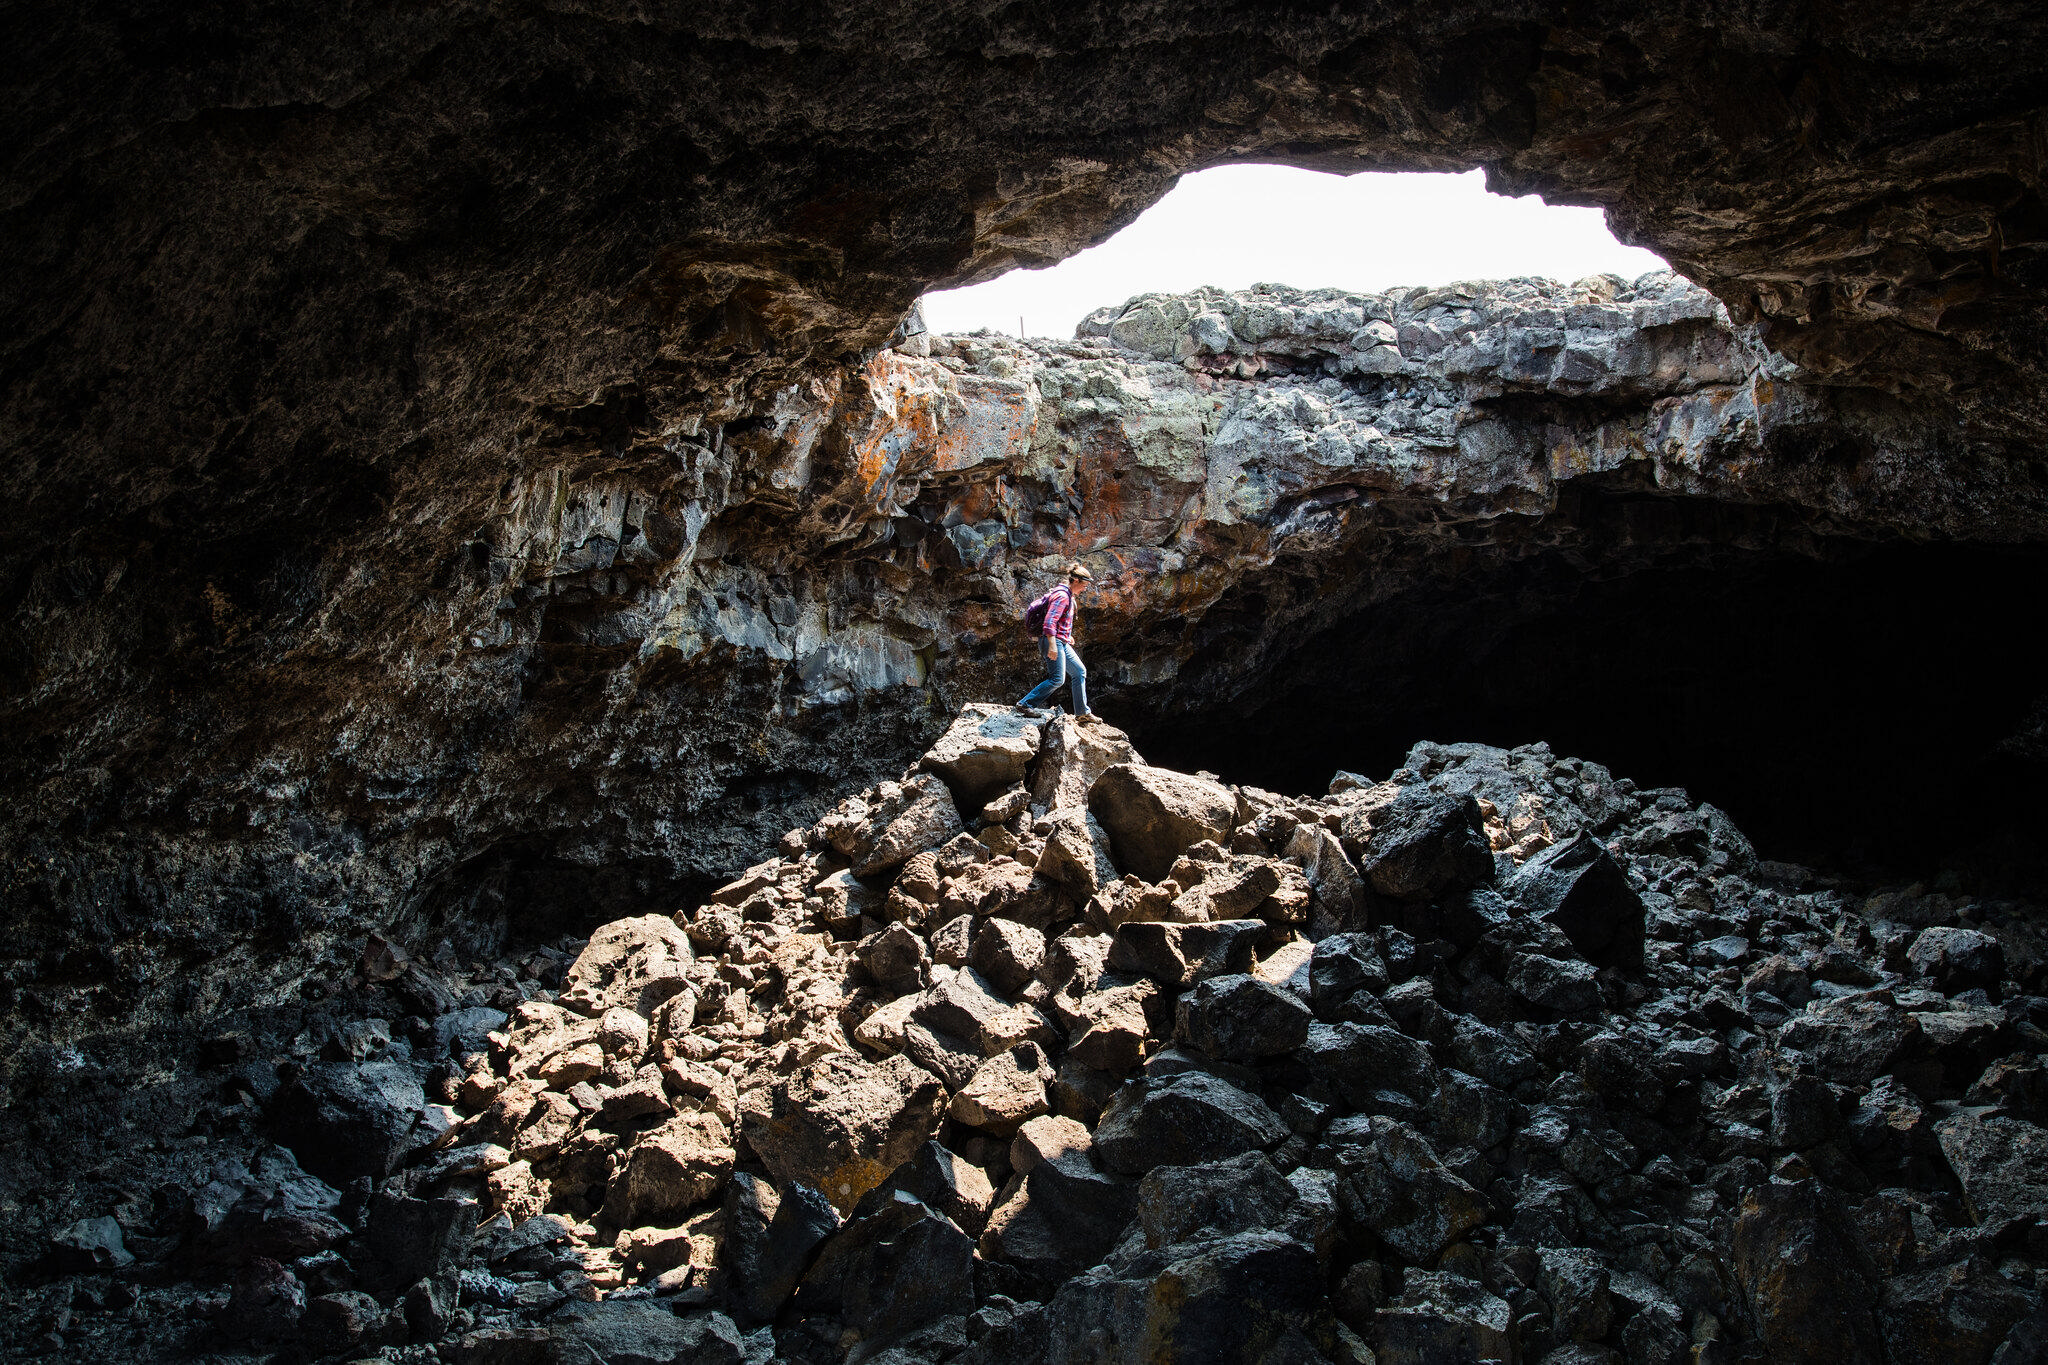 A figure stands inside a large lava tube on a pile of rubble, lit by a round opening overhead.